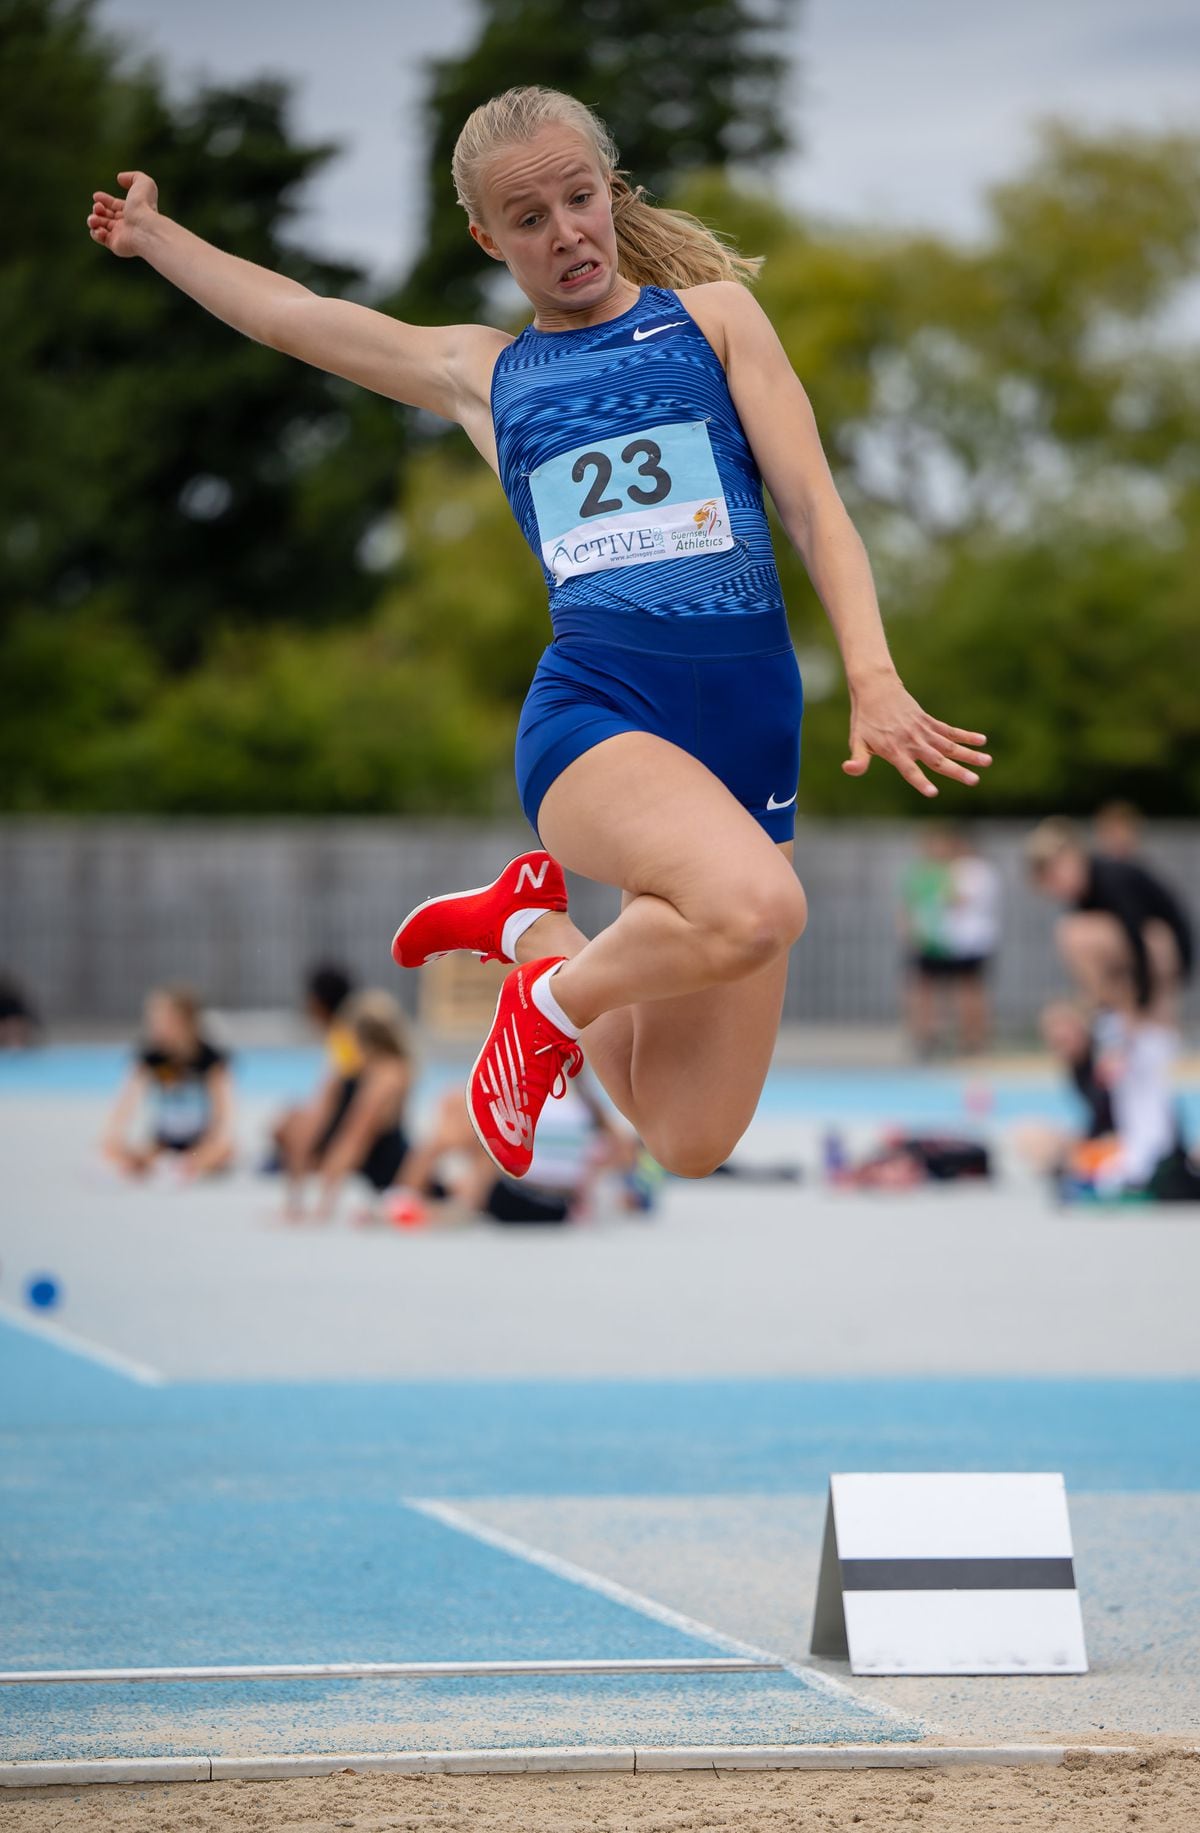 Abi Galpin set a new Island women's long-jump record of 5.92m. (Picture by Andrew Le Poidevin, 31173115)